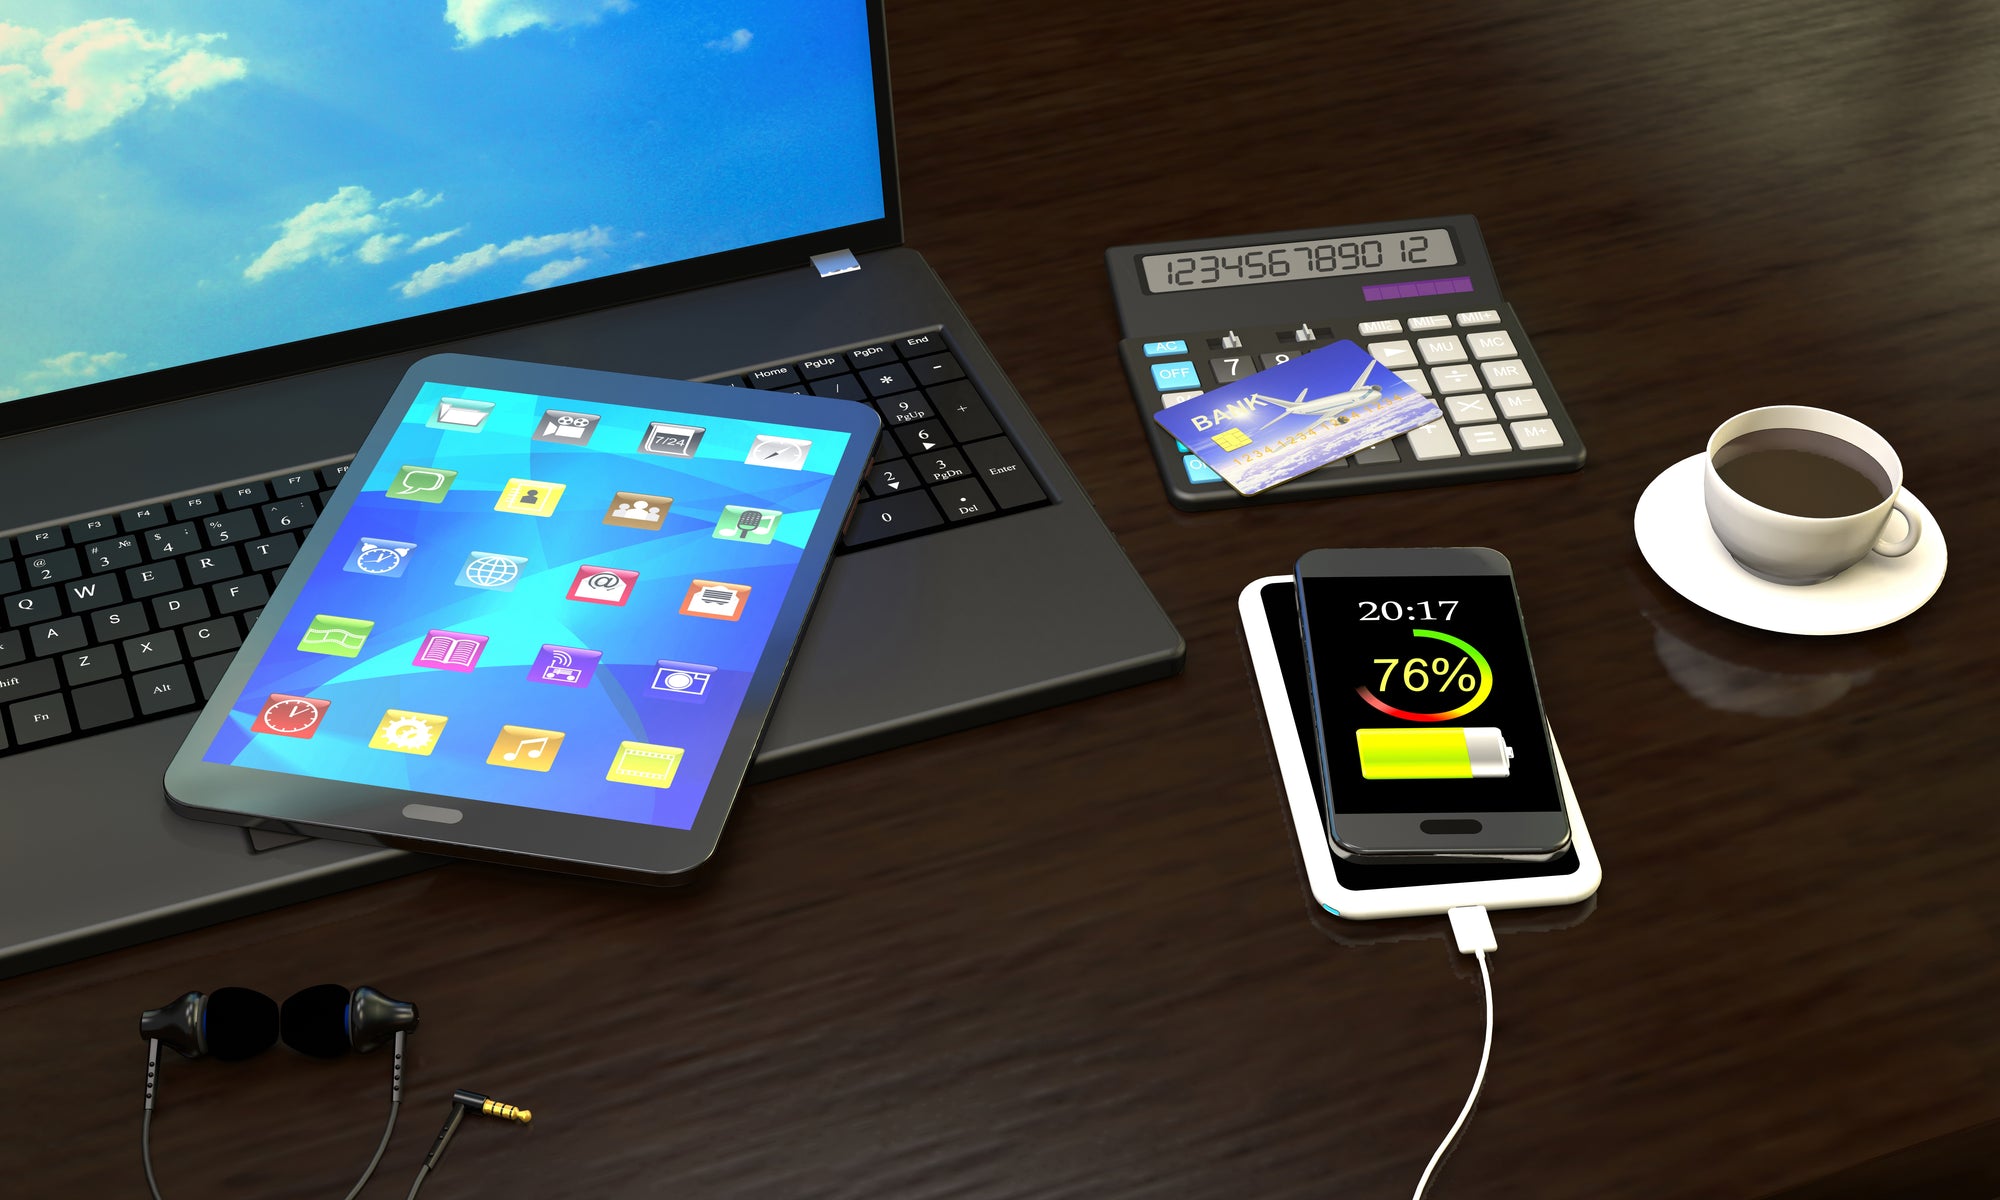 How Wireless Chargers Fare Compared to Traditional Chargers – A Brief Analysis